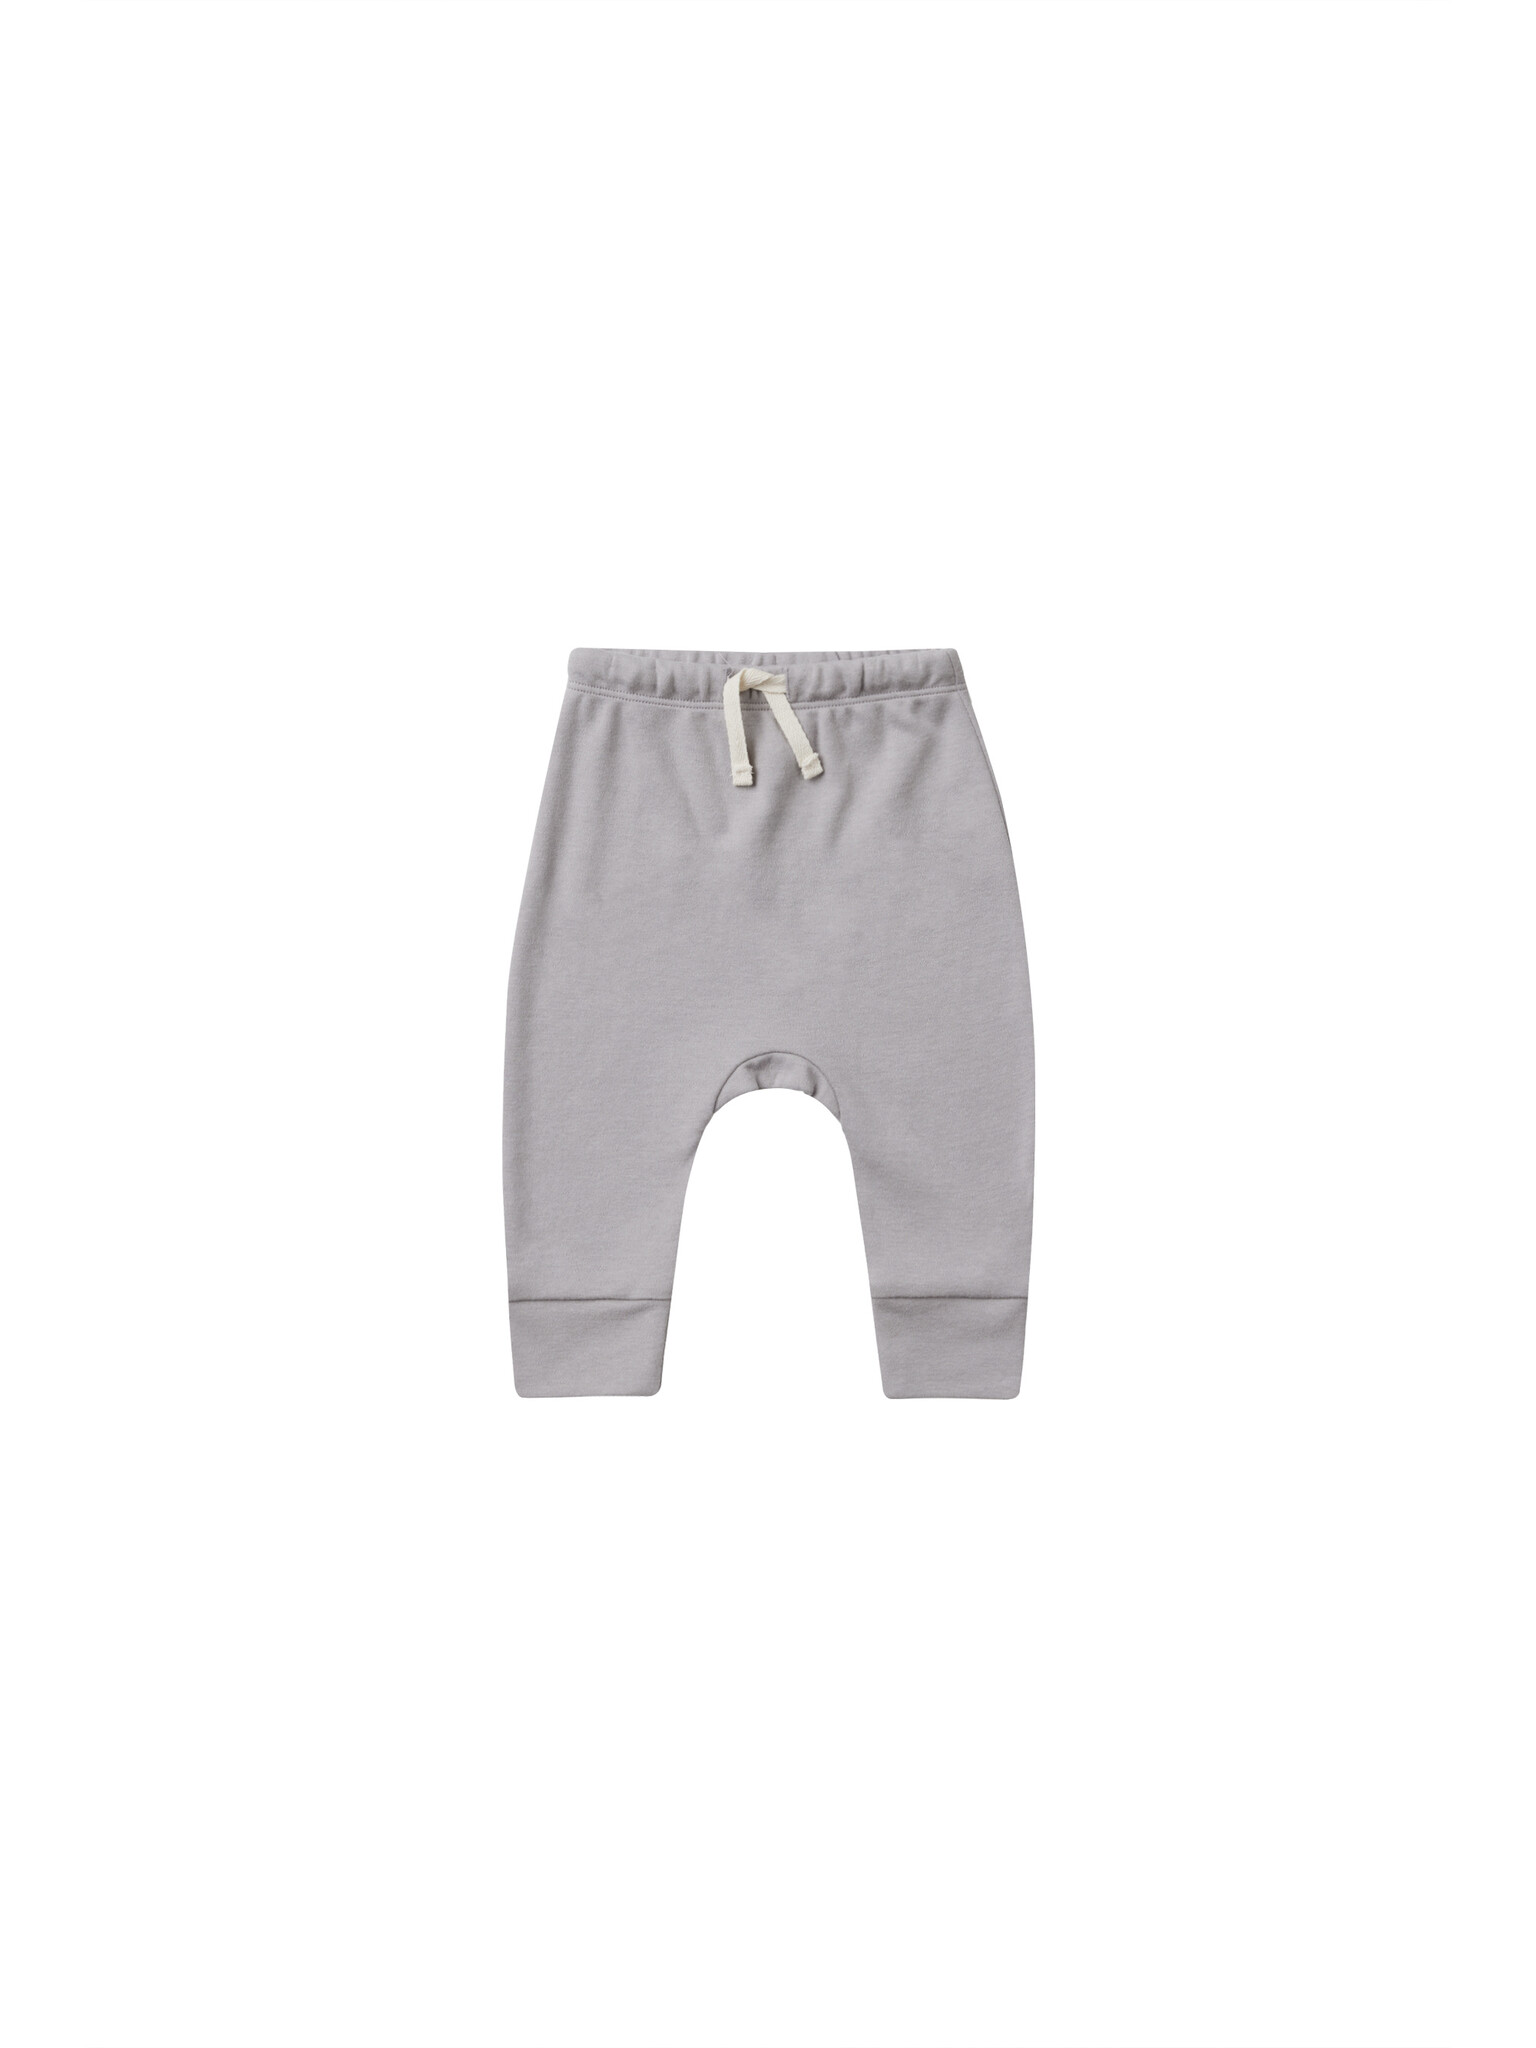 Quincy Mae drawstring pant || periwinkle